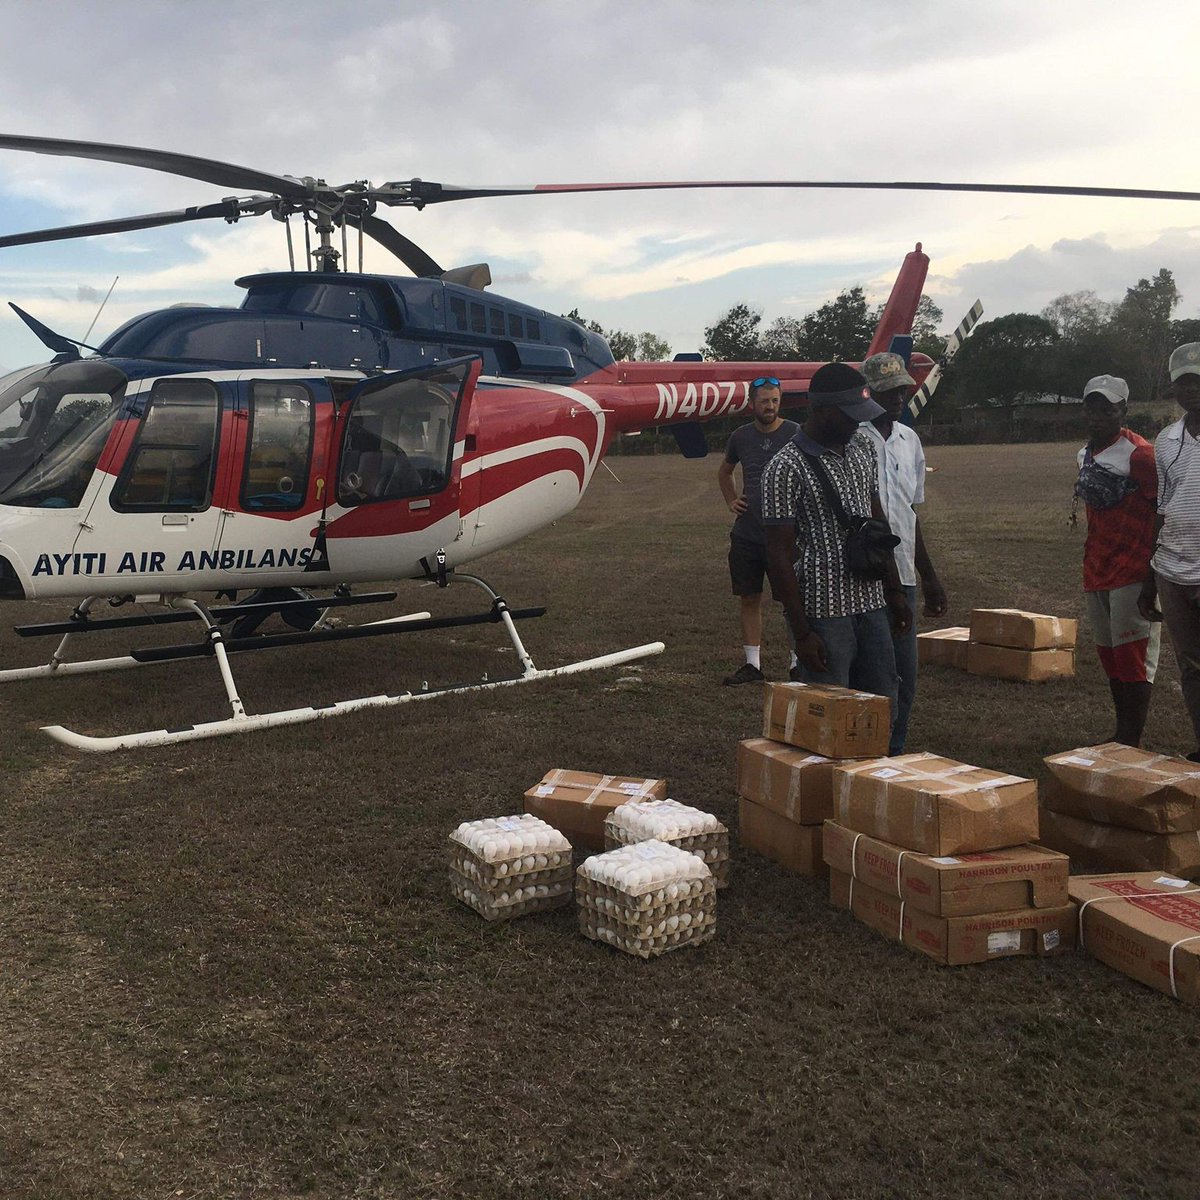 The Haiti Air Ambulance team brought smiles to many children's faces this week! We had the privilege of delivering food to orphanages in need.